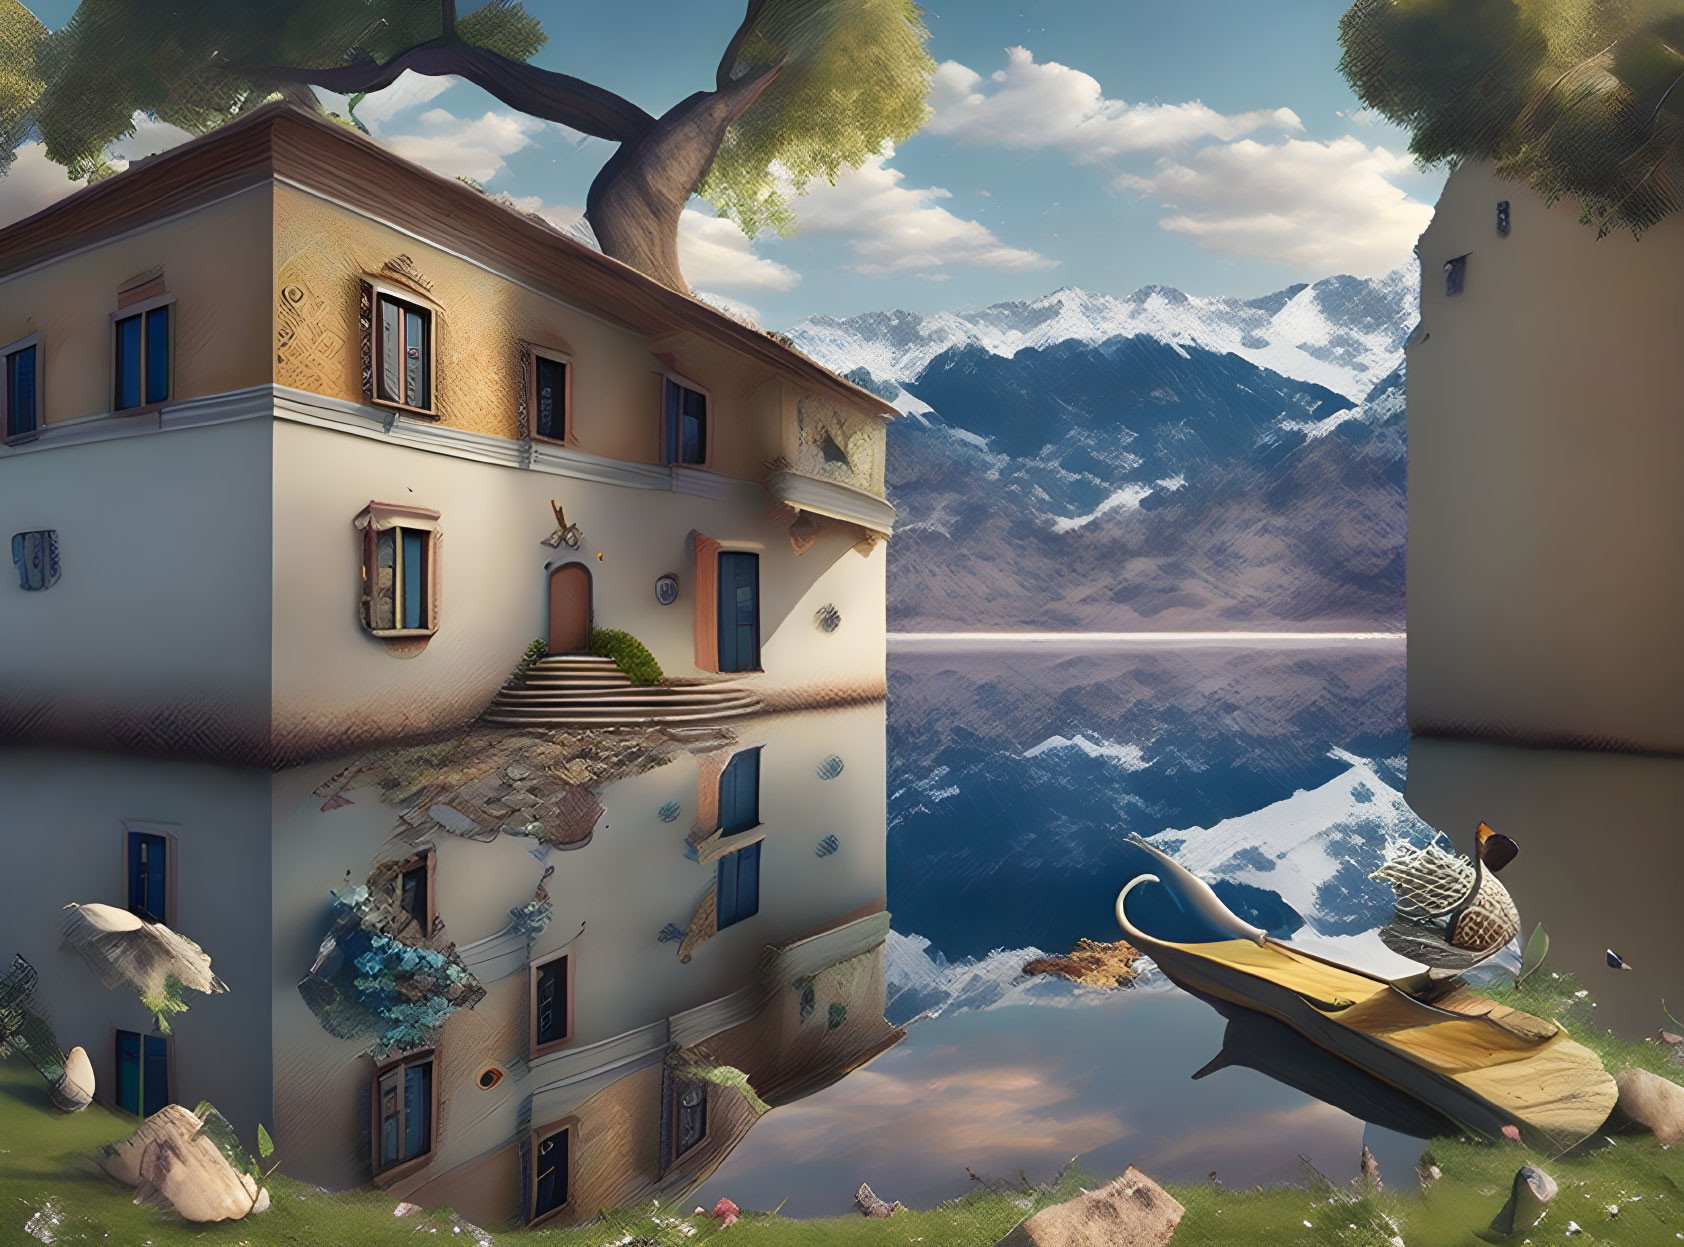 Surreal image of flipped house, floating boat, duck, and mountain scenery